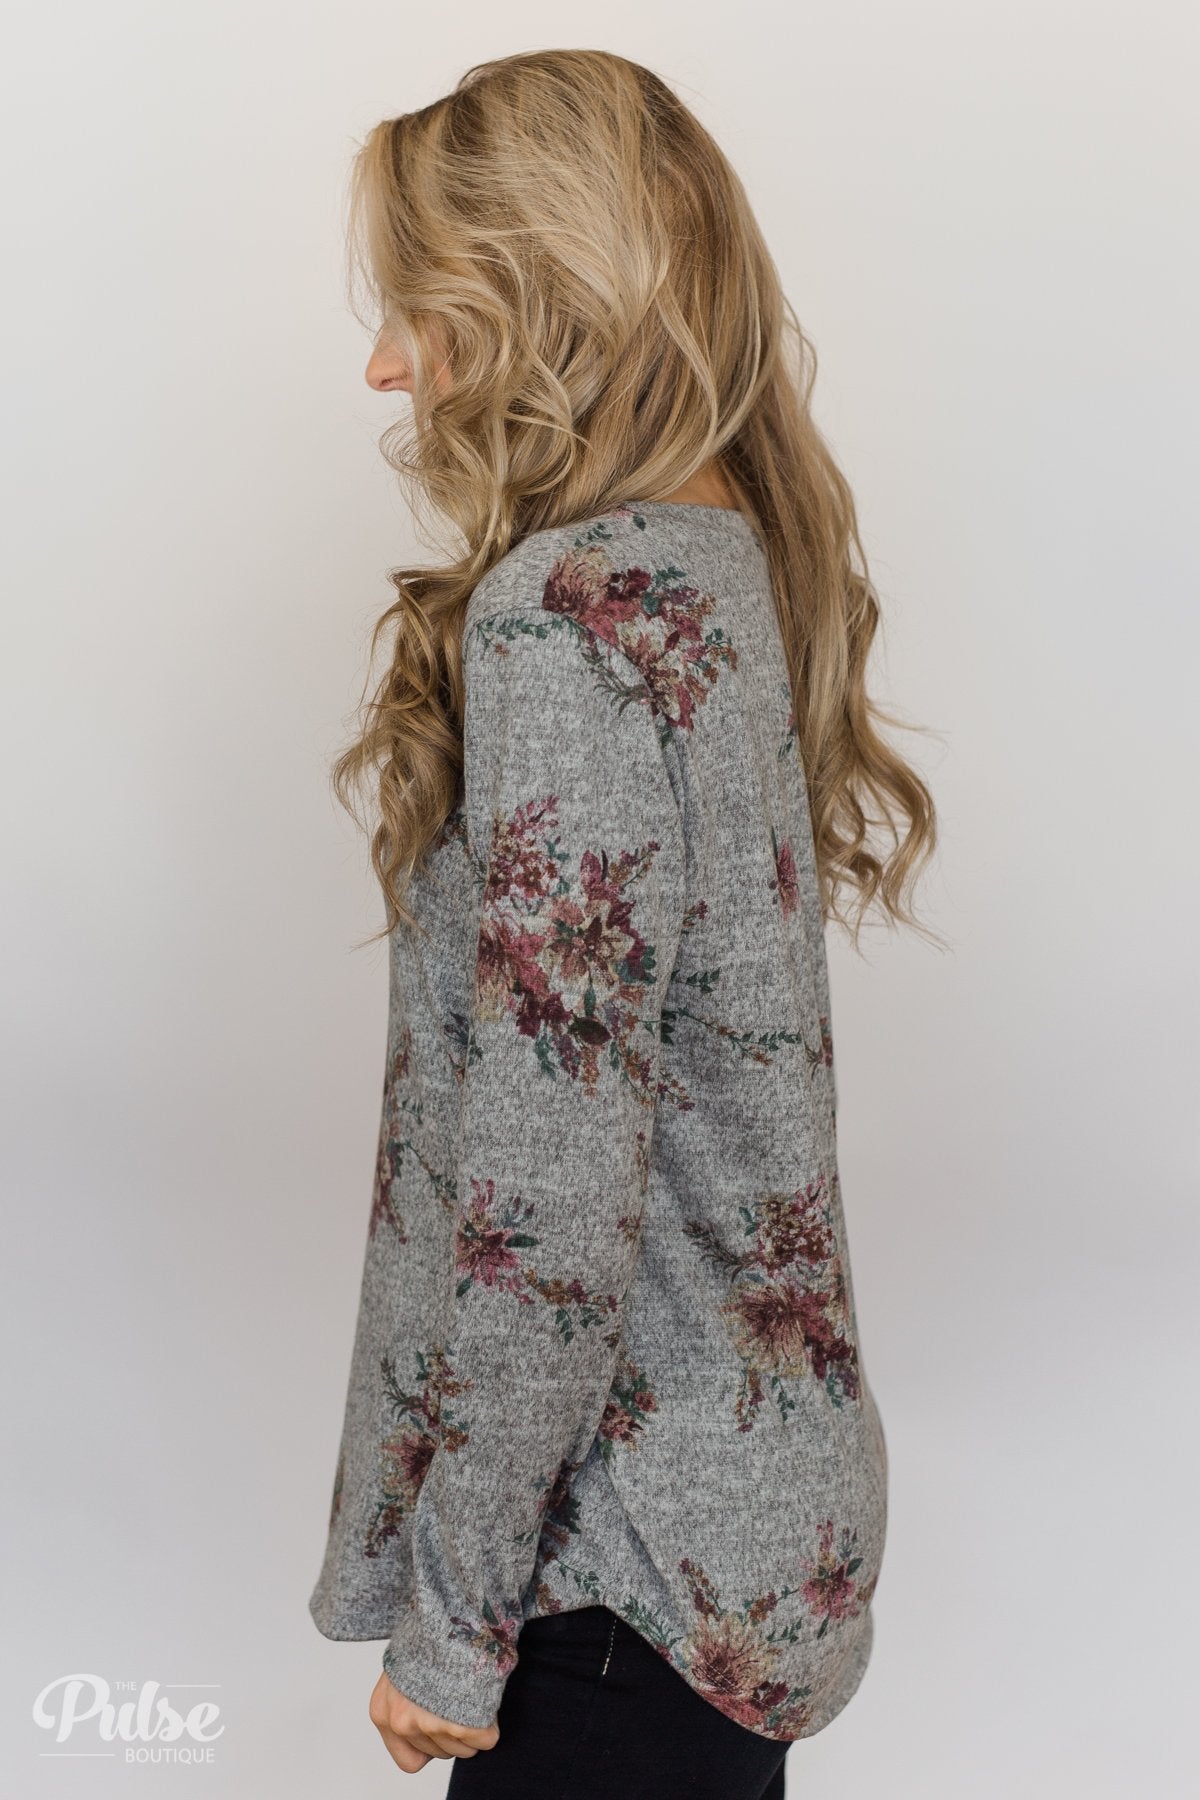 Hand Picked By You Floral Pullover Top- Heather Grey